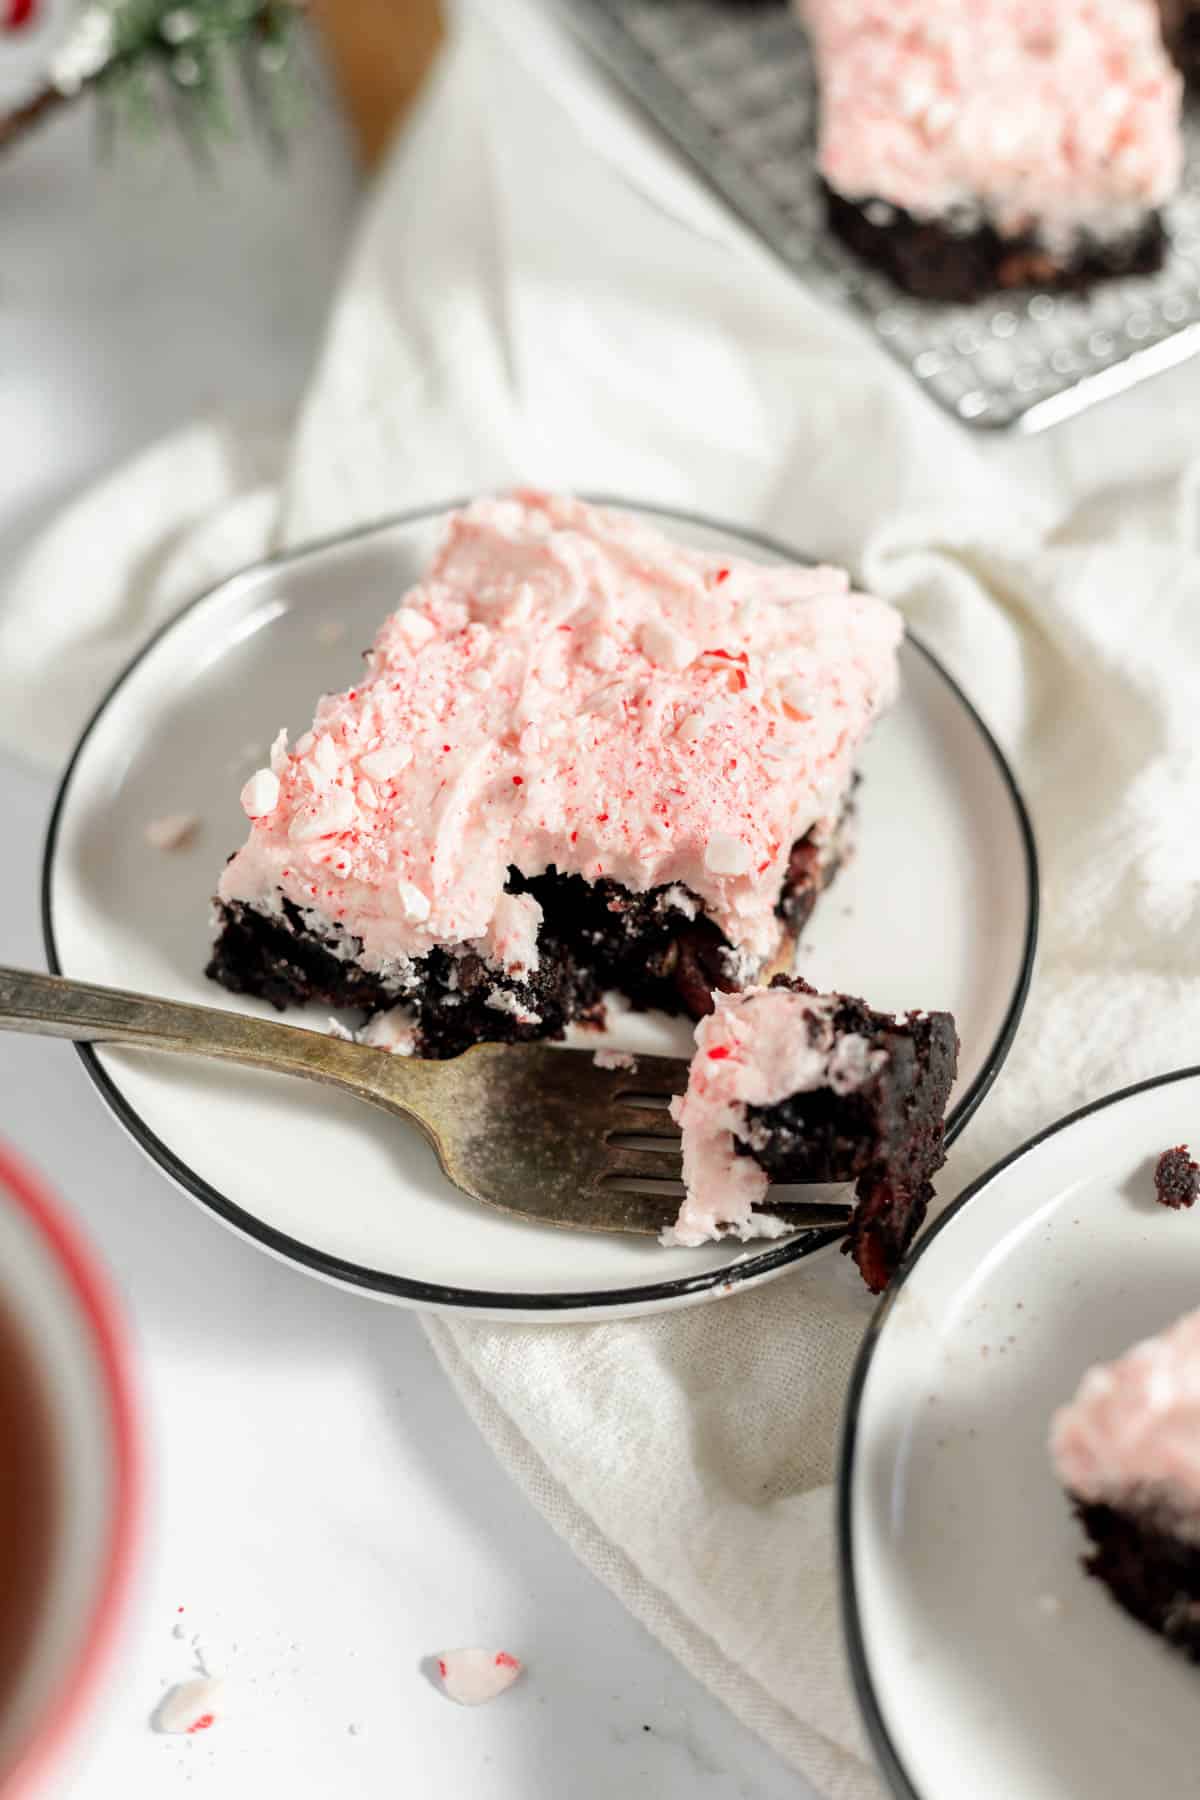 A candy cane brownie with a bite taken out of it.